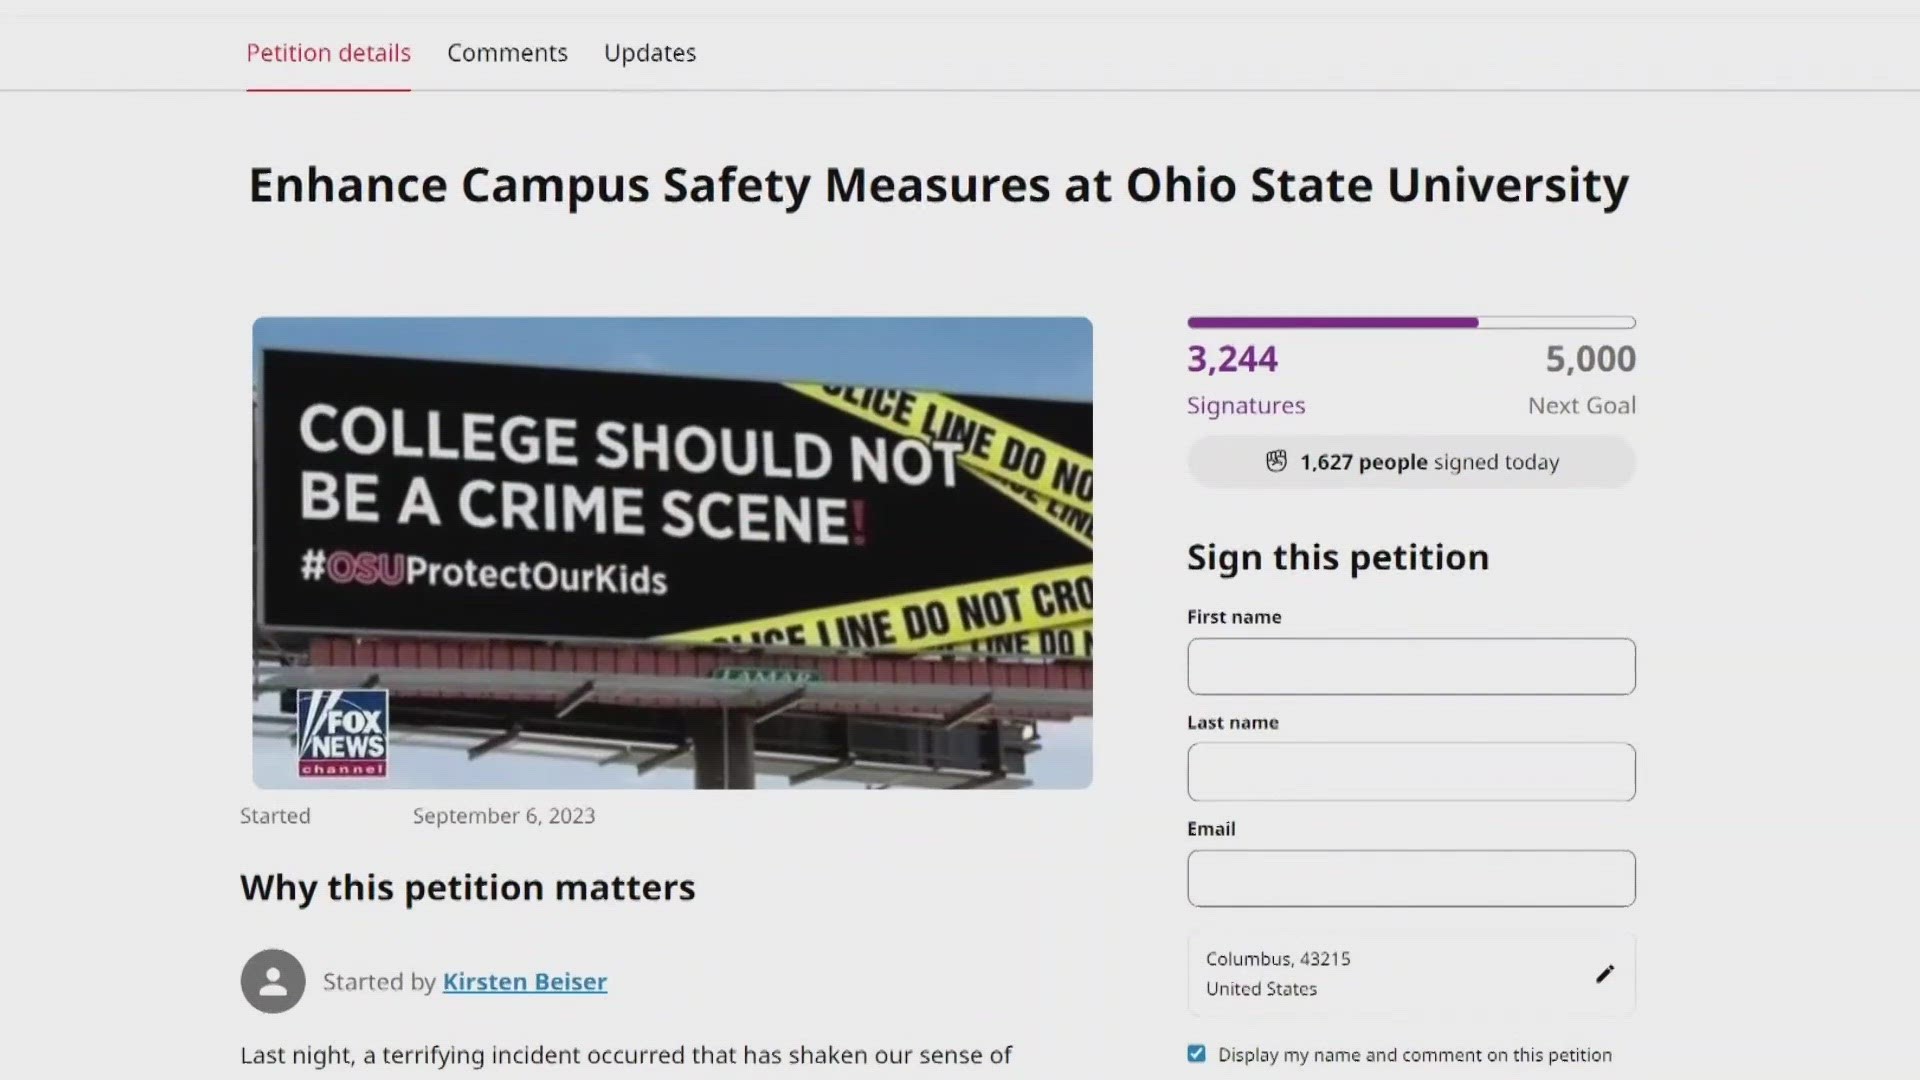 Why The Ohio State University decided to go public about